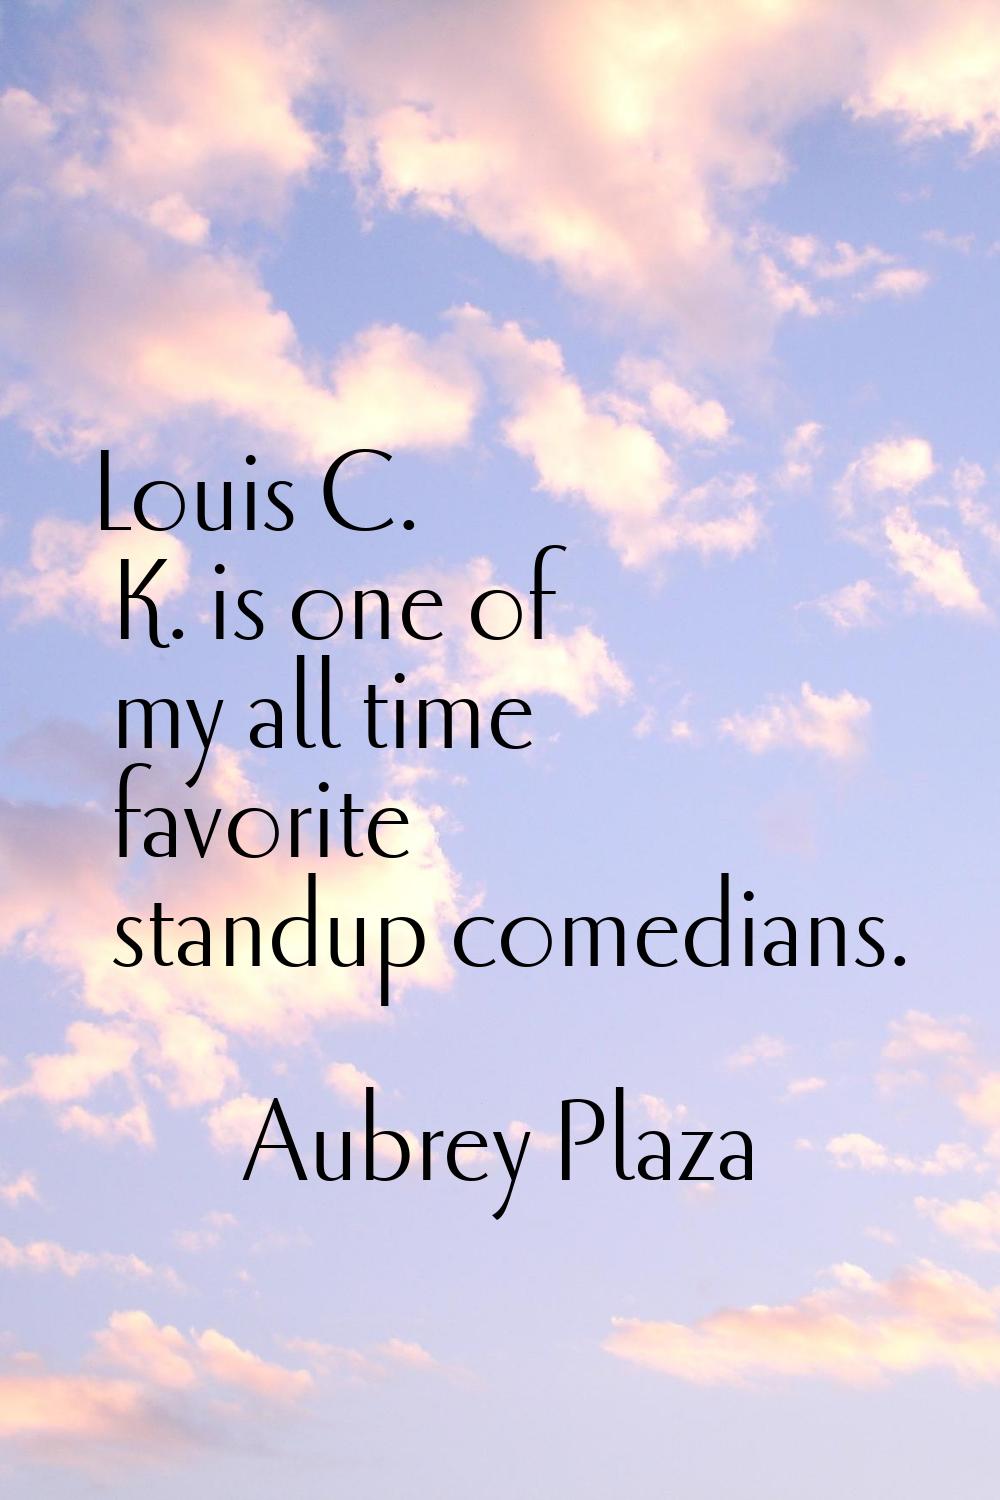 Louis C. K. is one of my all time favorite standup comedians.